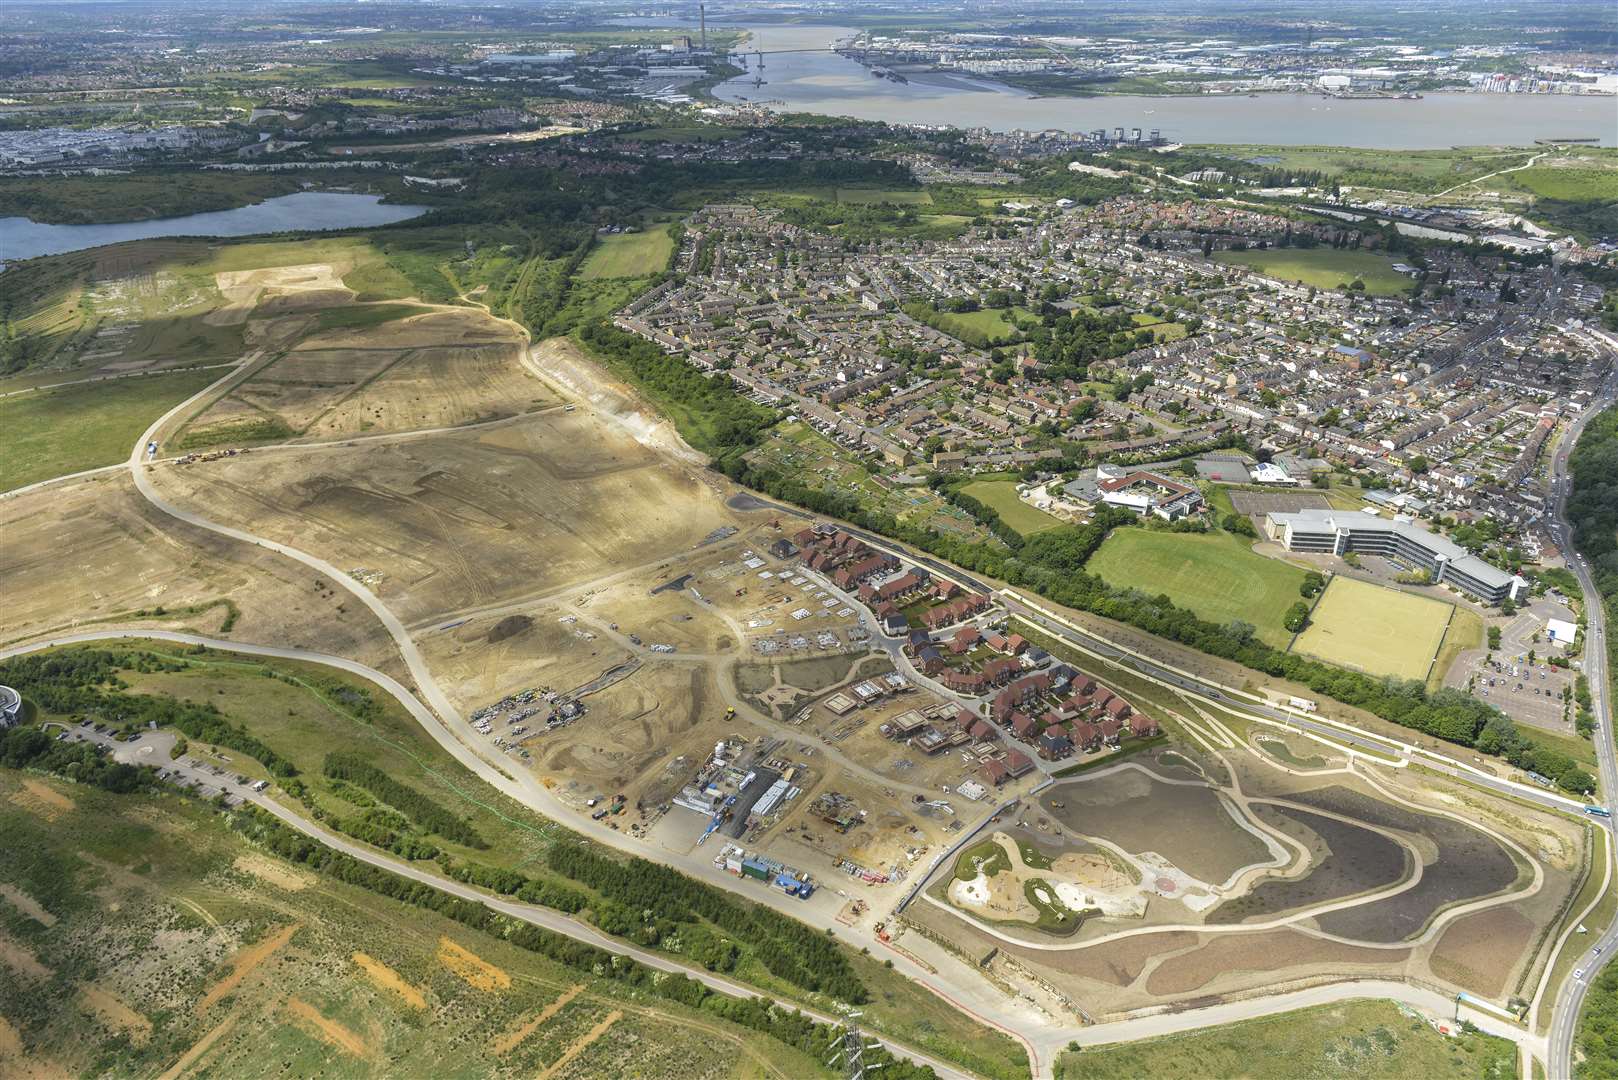 The Eastern Quarry where Ebbsfleet Green Primary School is being constructed.